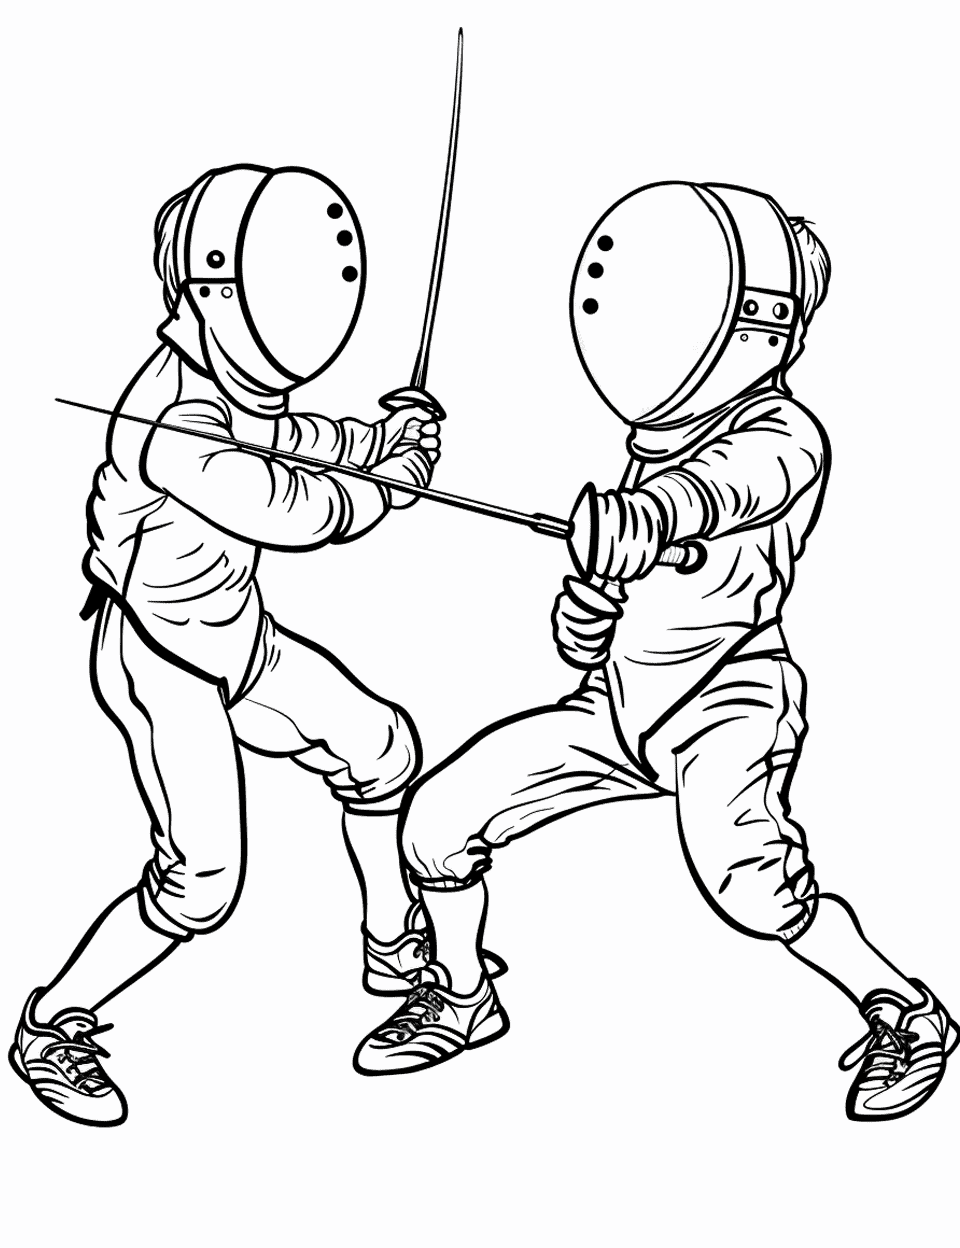 Fencing Duel Sports Coloring Page - Two fencers wearing full fancing gear dueling each other in a fencing match.